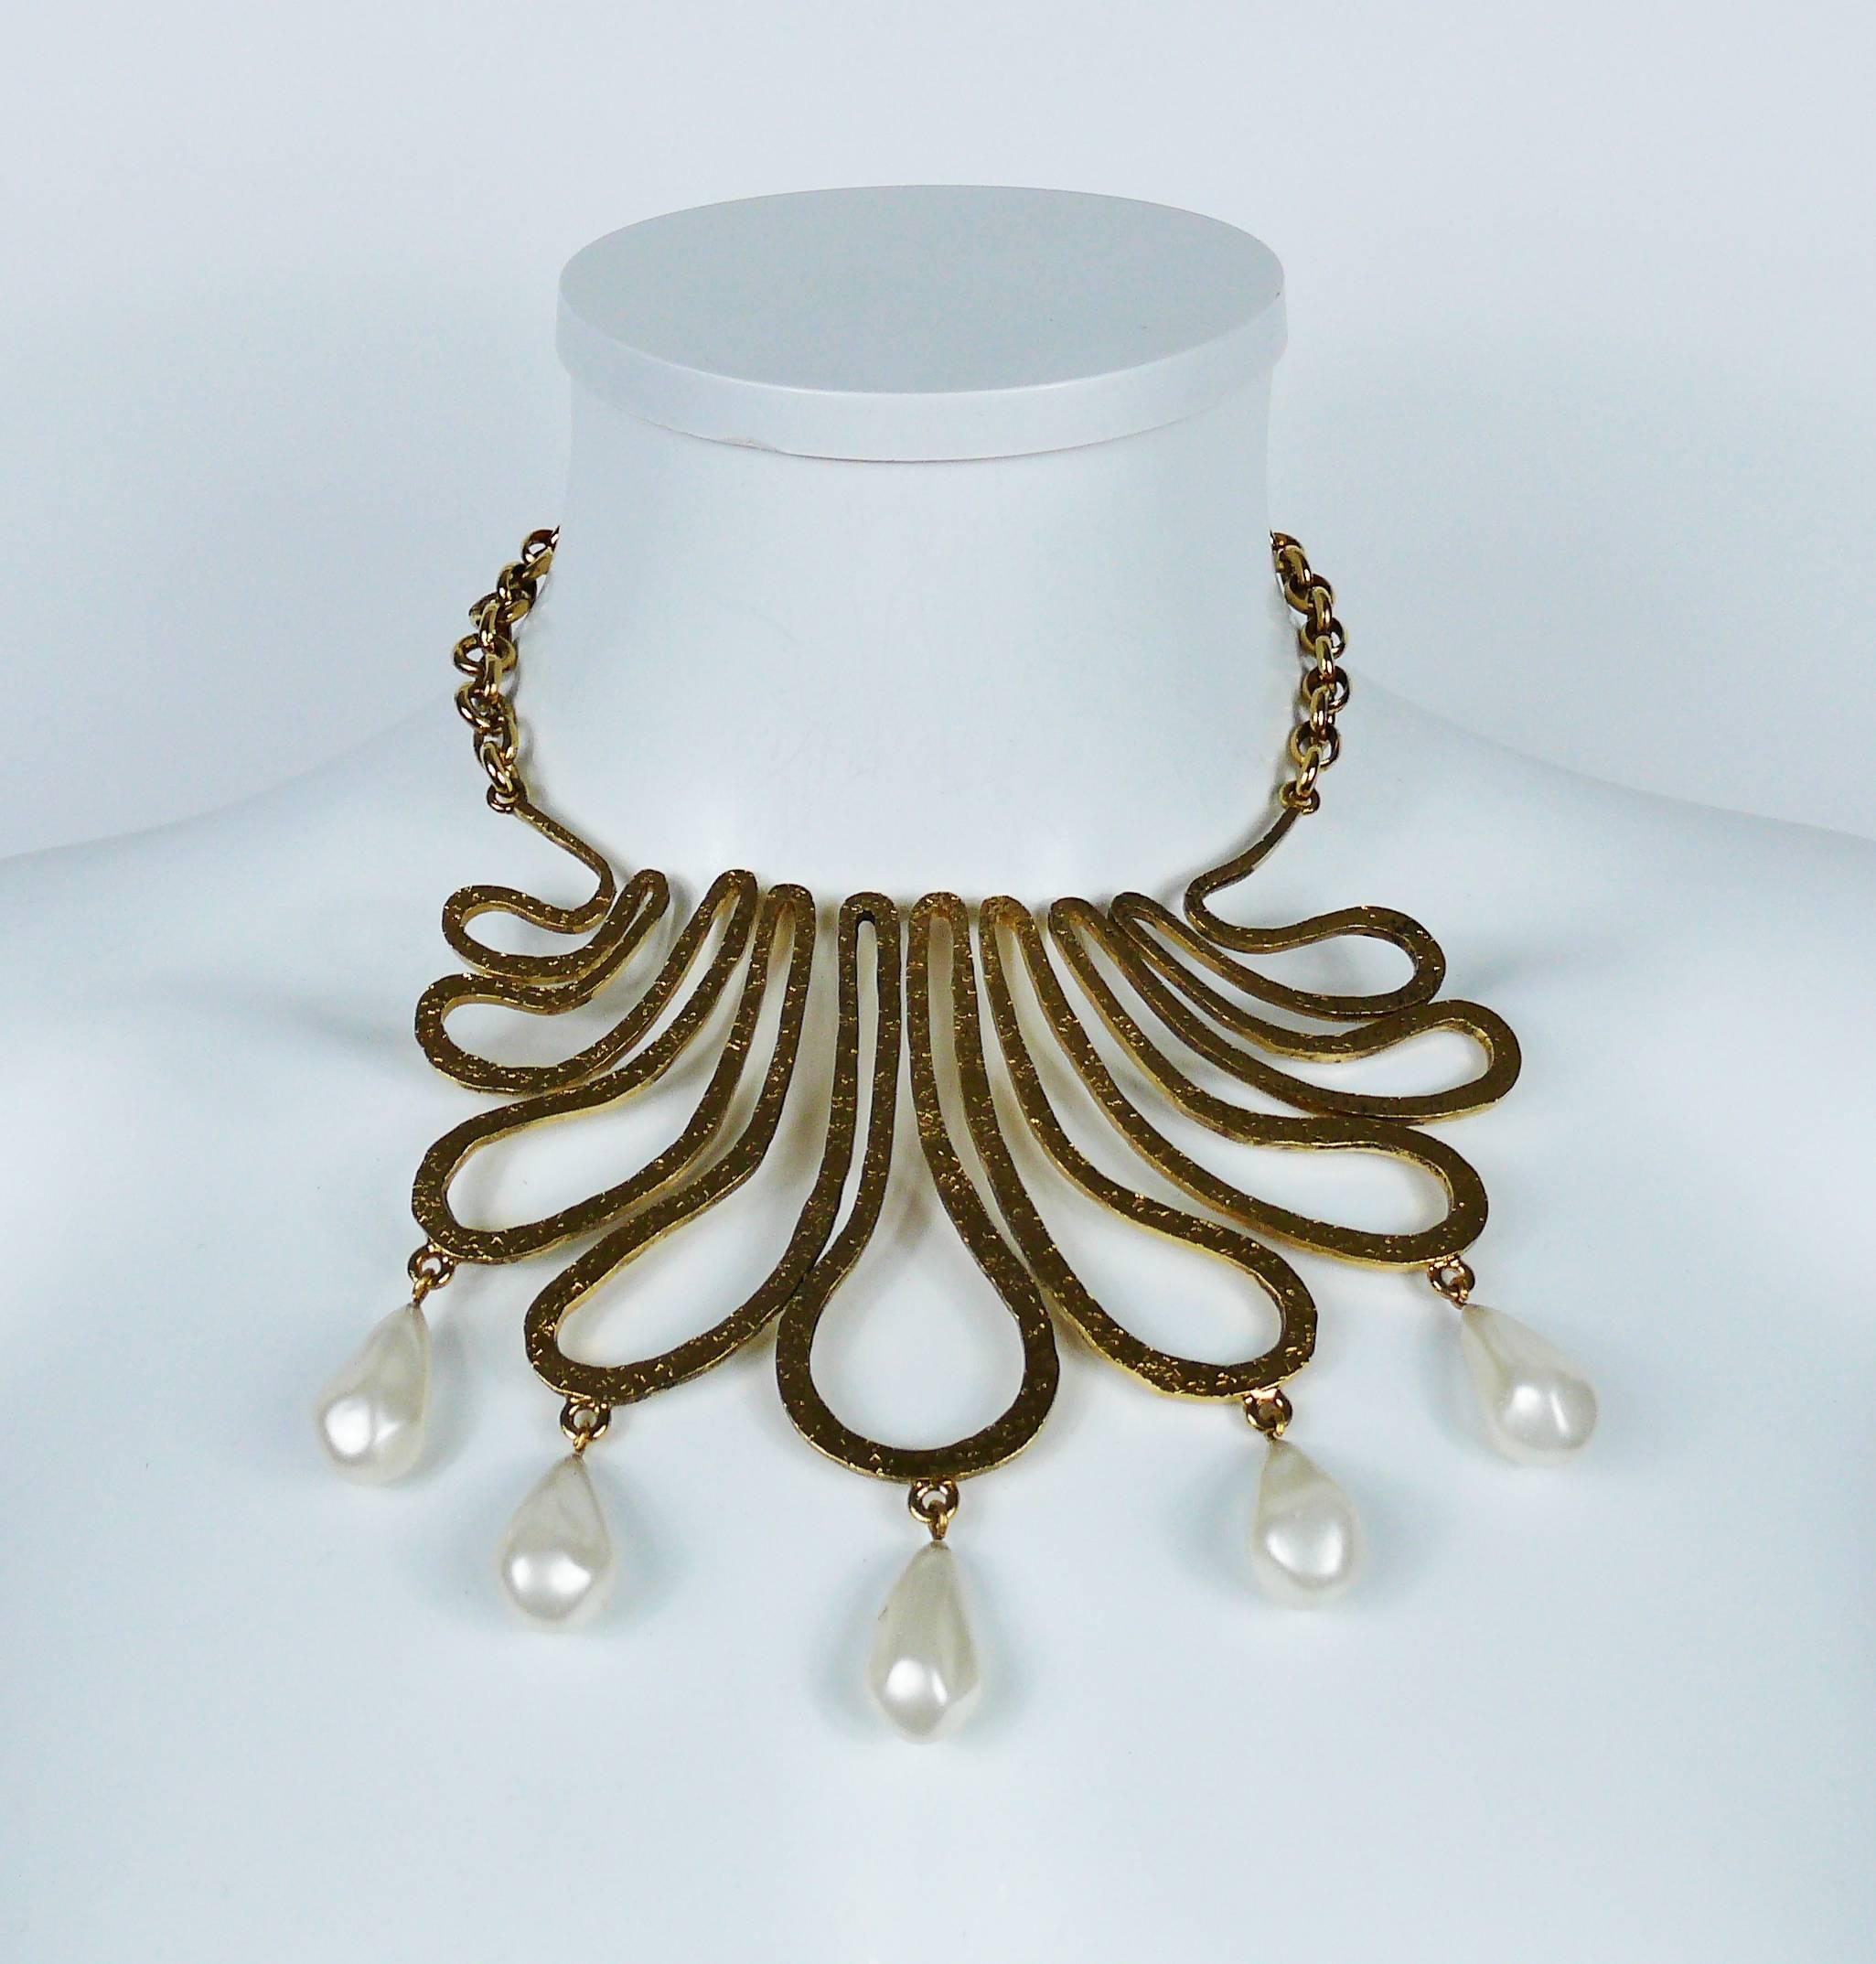 CHANEL vintage gold toned bib necklace featuring a gorgeous arabesque design embellished with five large glass faux pearl drops.

Circa 1990.

Embossed CHANEL.

Indicative measurements : inner circumference approx. 34.56 cm (13.61 inches) -